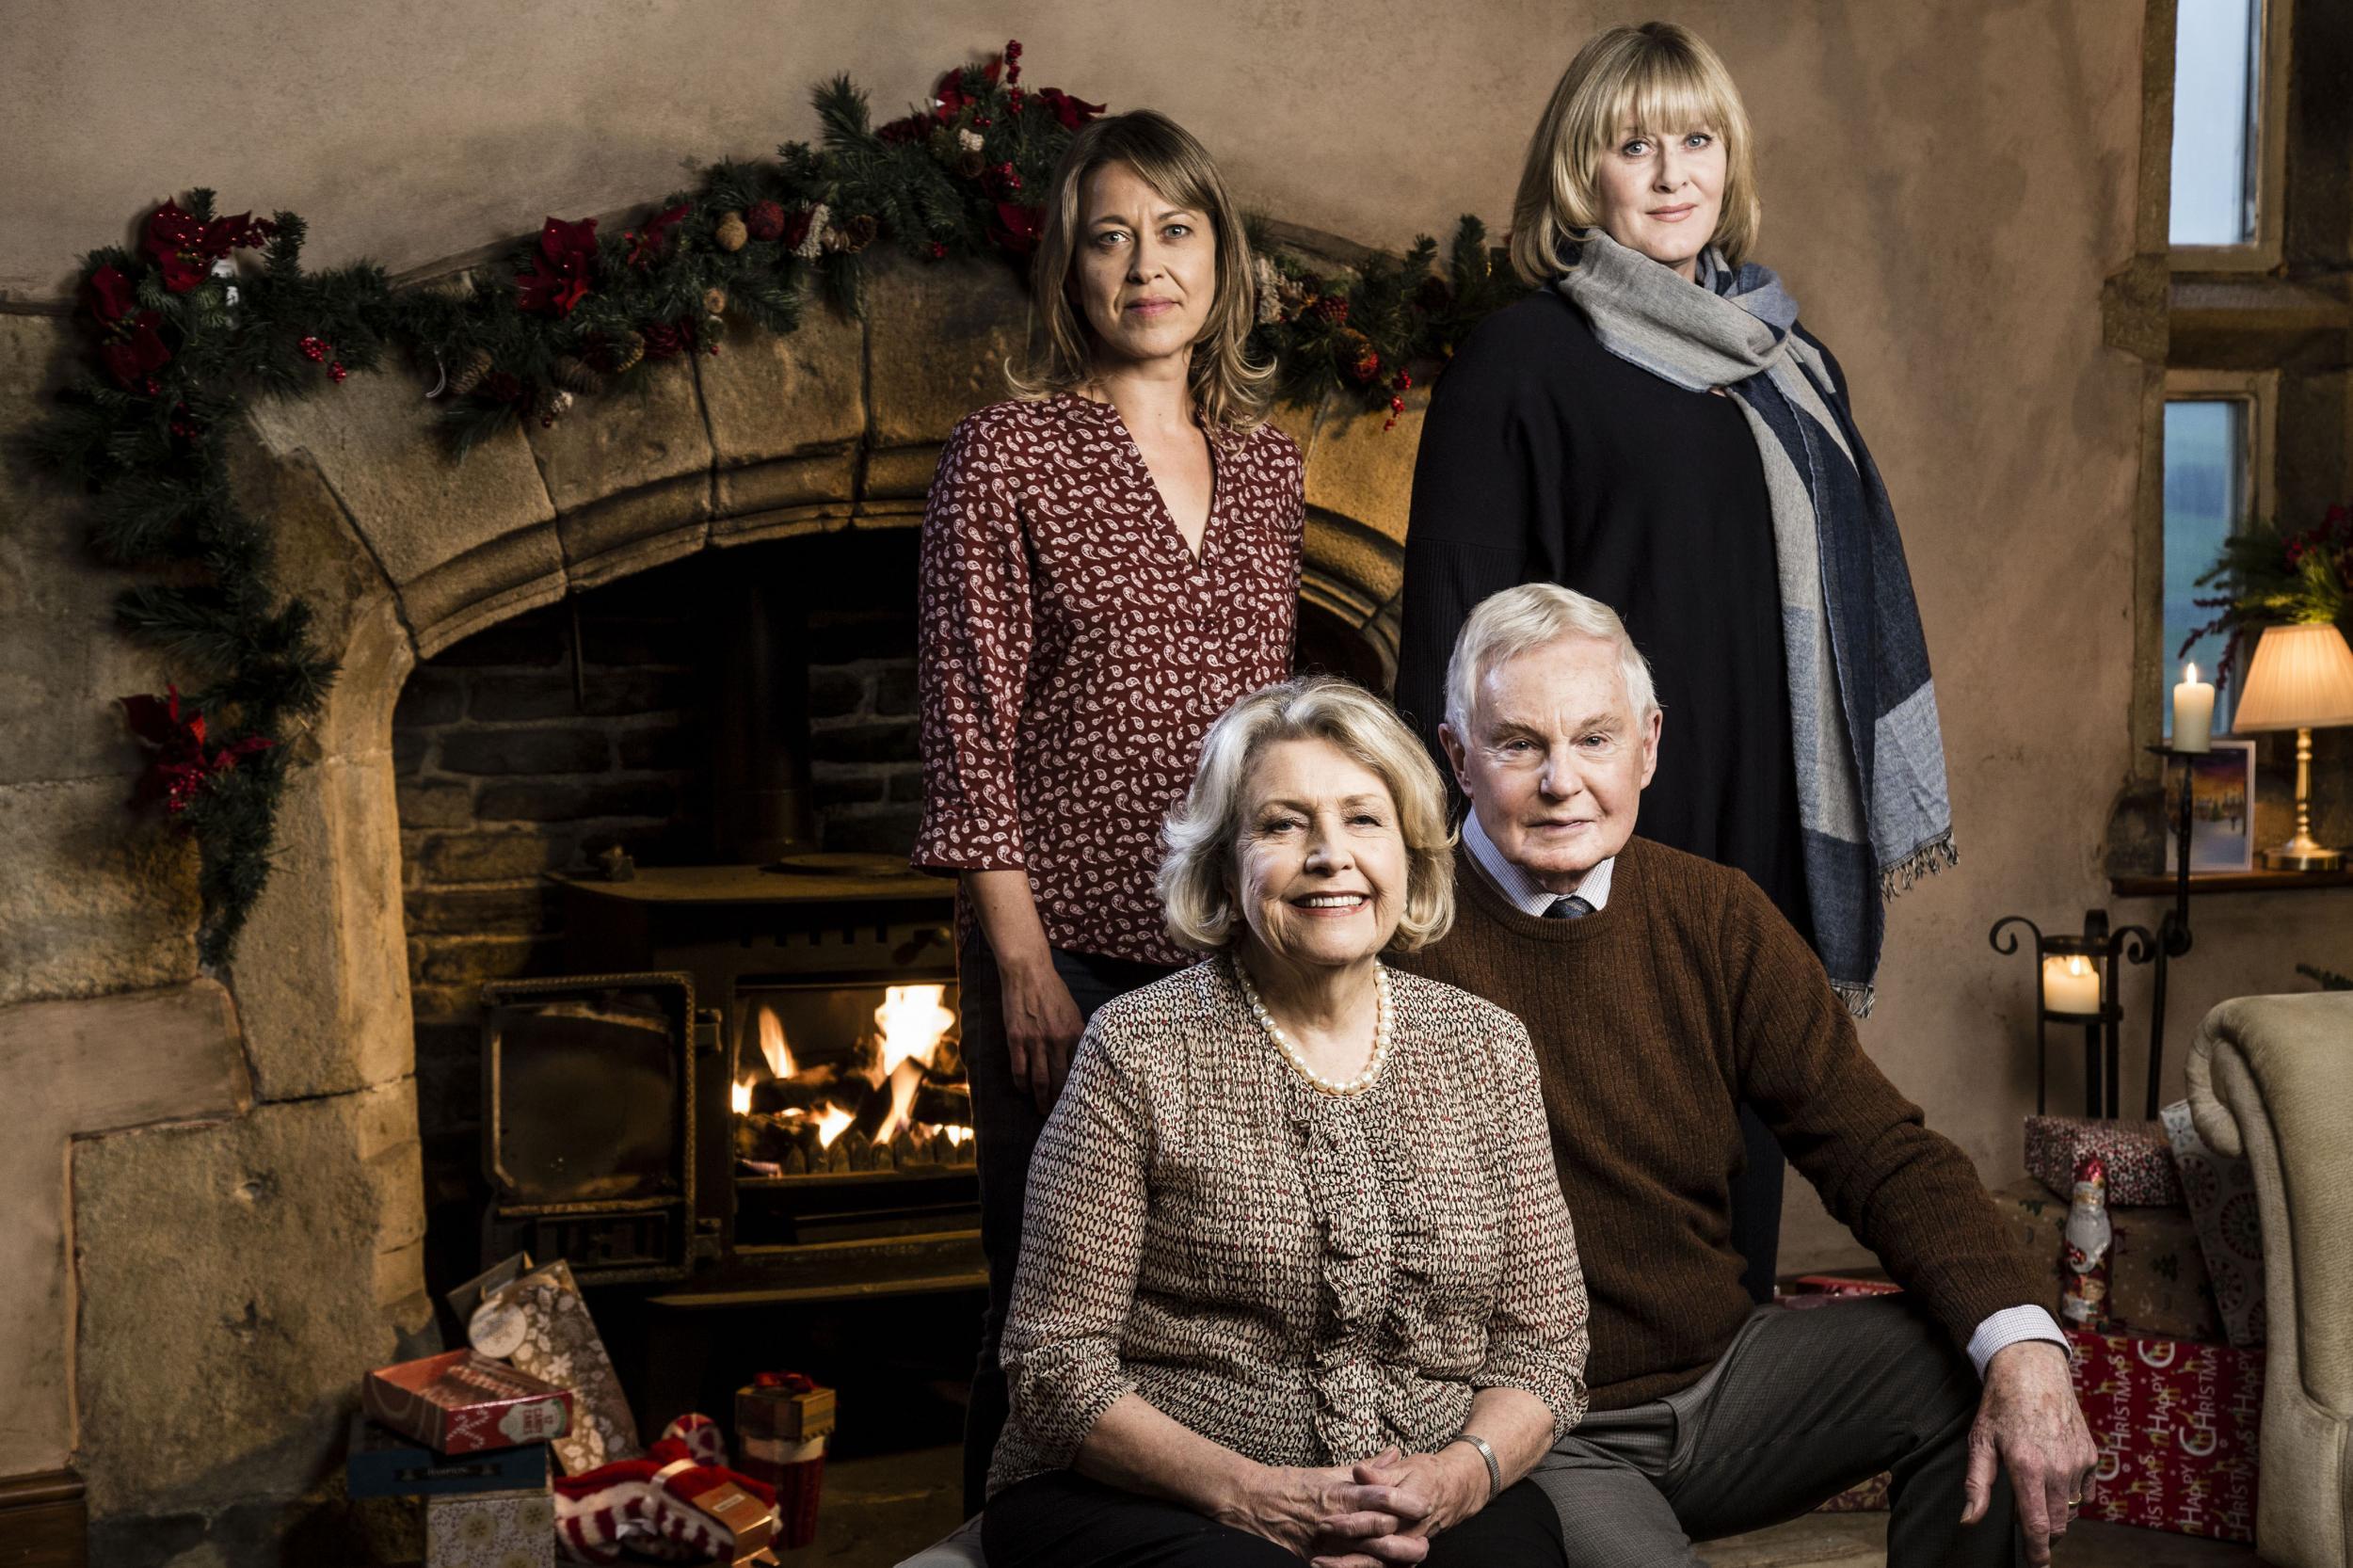 The festive edition of ‘Last Tango in Halifax’ left this reviewer cold